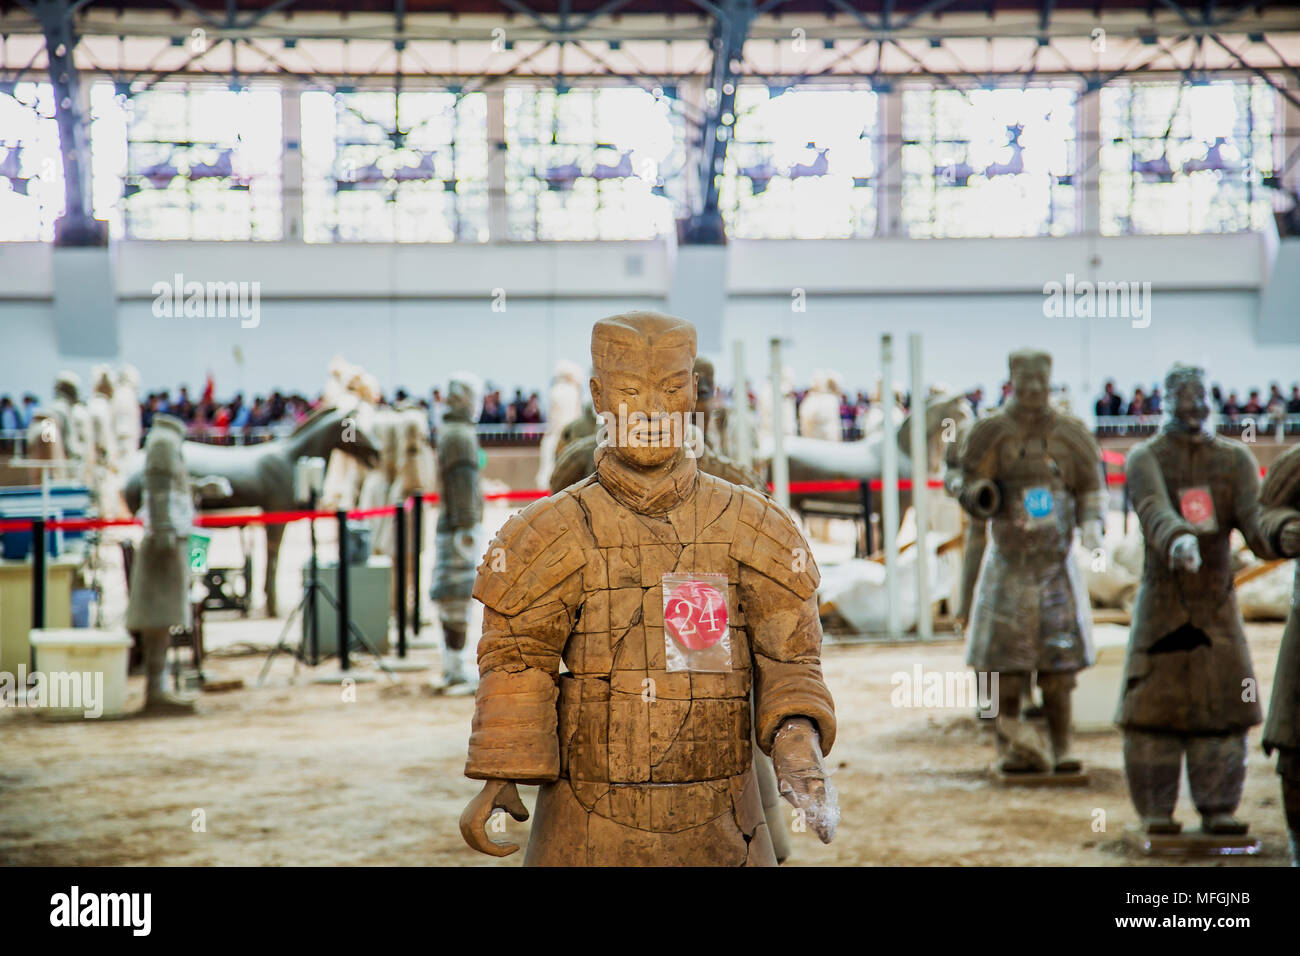 Terracotta Warriors - Terracotta army soldier stands in the restoration area wrapped in plastic and numbered. Breaks can be seen where pieced together Stock Photo